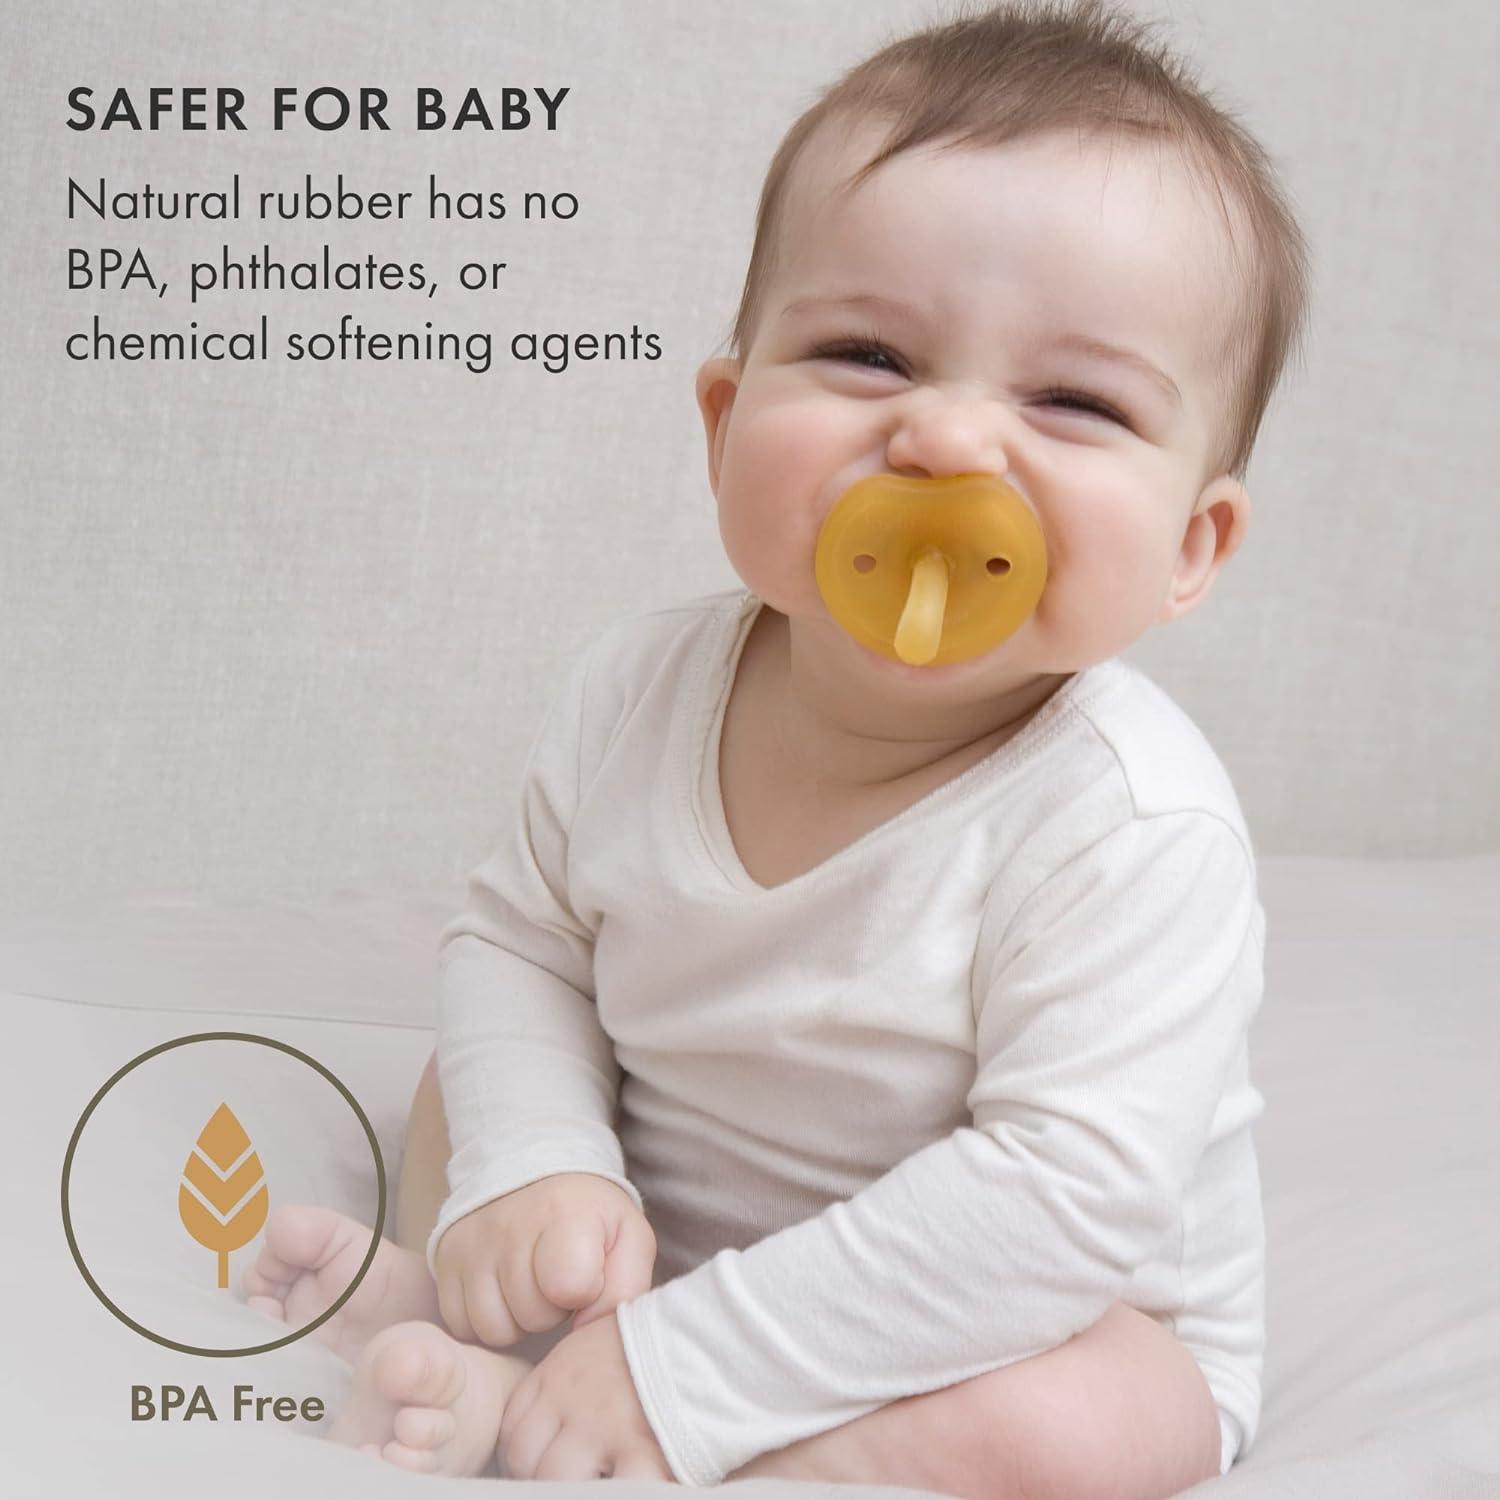 Natursutten Pacifiers 6-12 Months - 2-Pack Original Shield Orthodontic  Nipple Natural Rubber Safe & Soft BPA-Free Pacifiers for Breastfeeding  Babies - Newborn Pacifiers Made in Italy 1 Count (Pack of 2)  Original/Orthodon